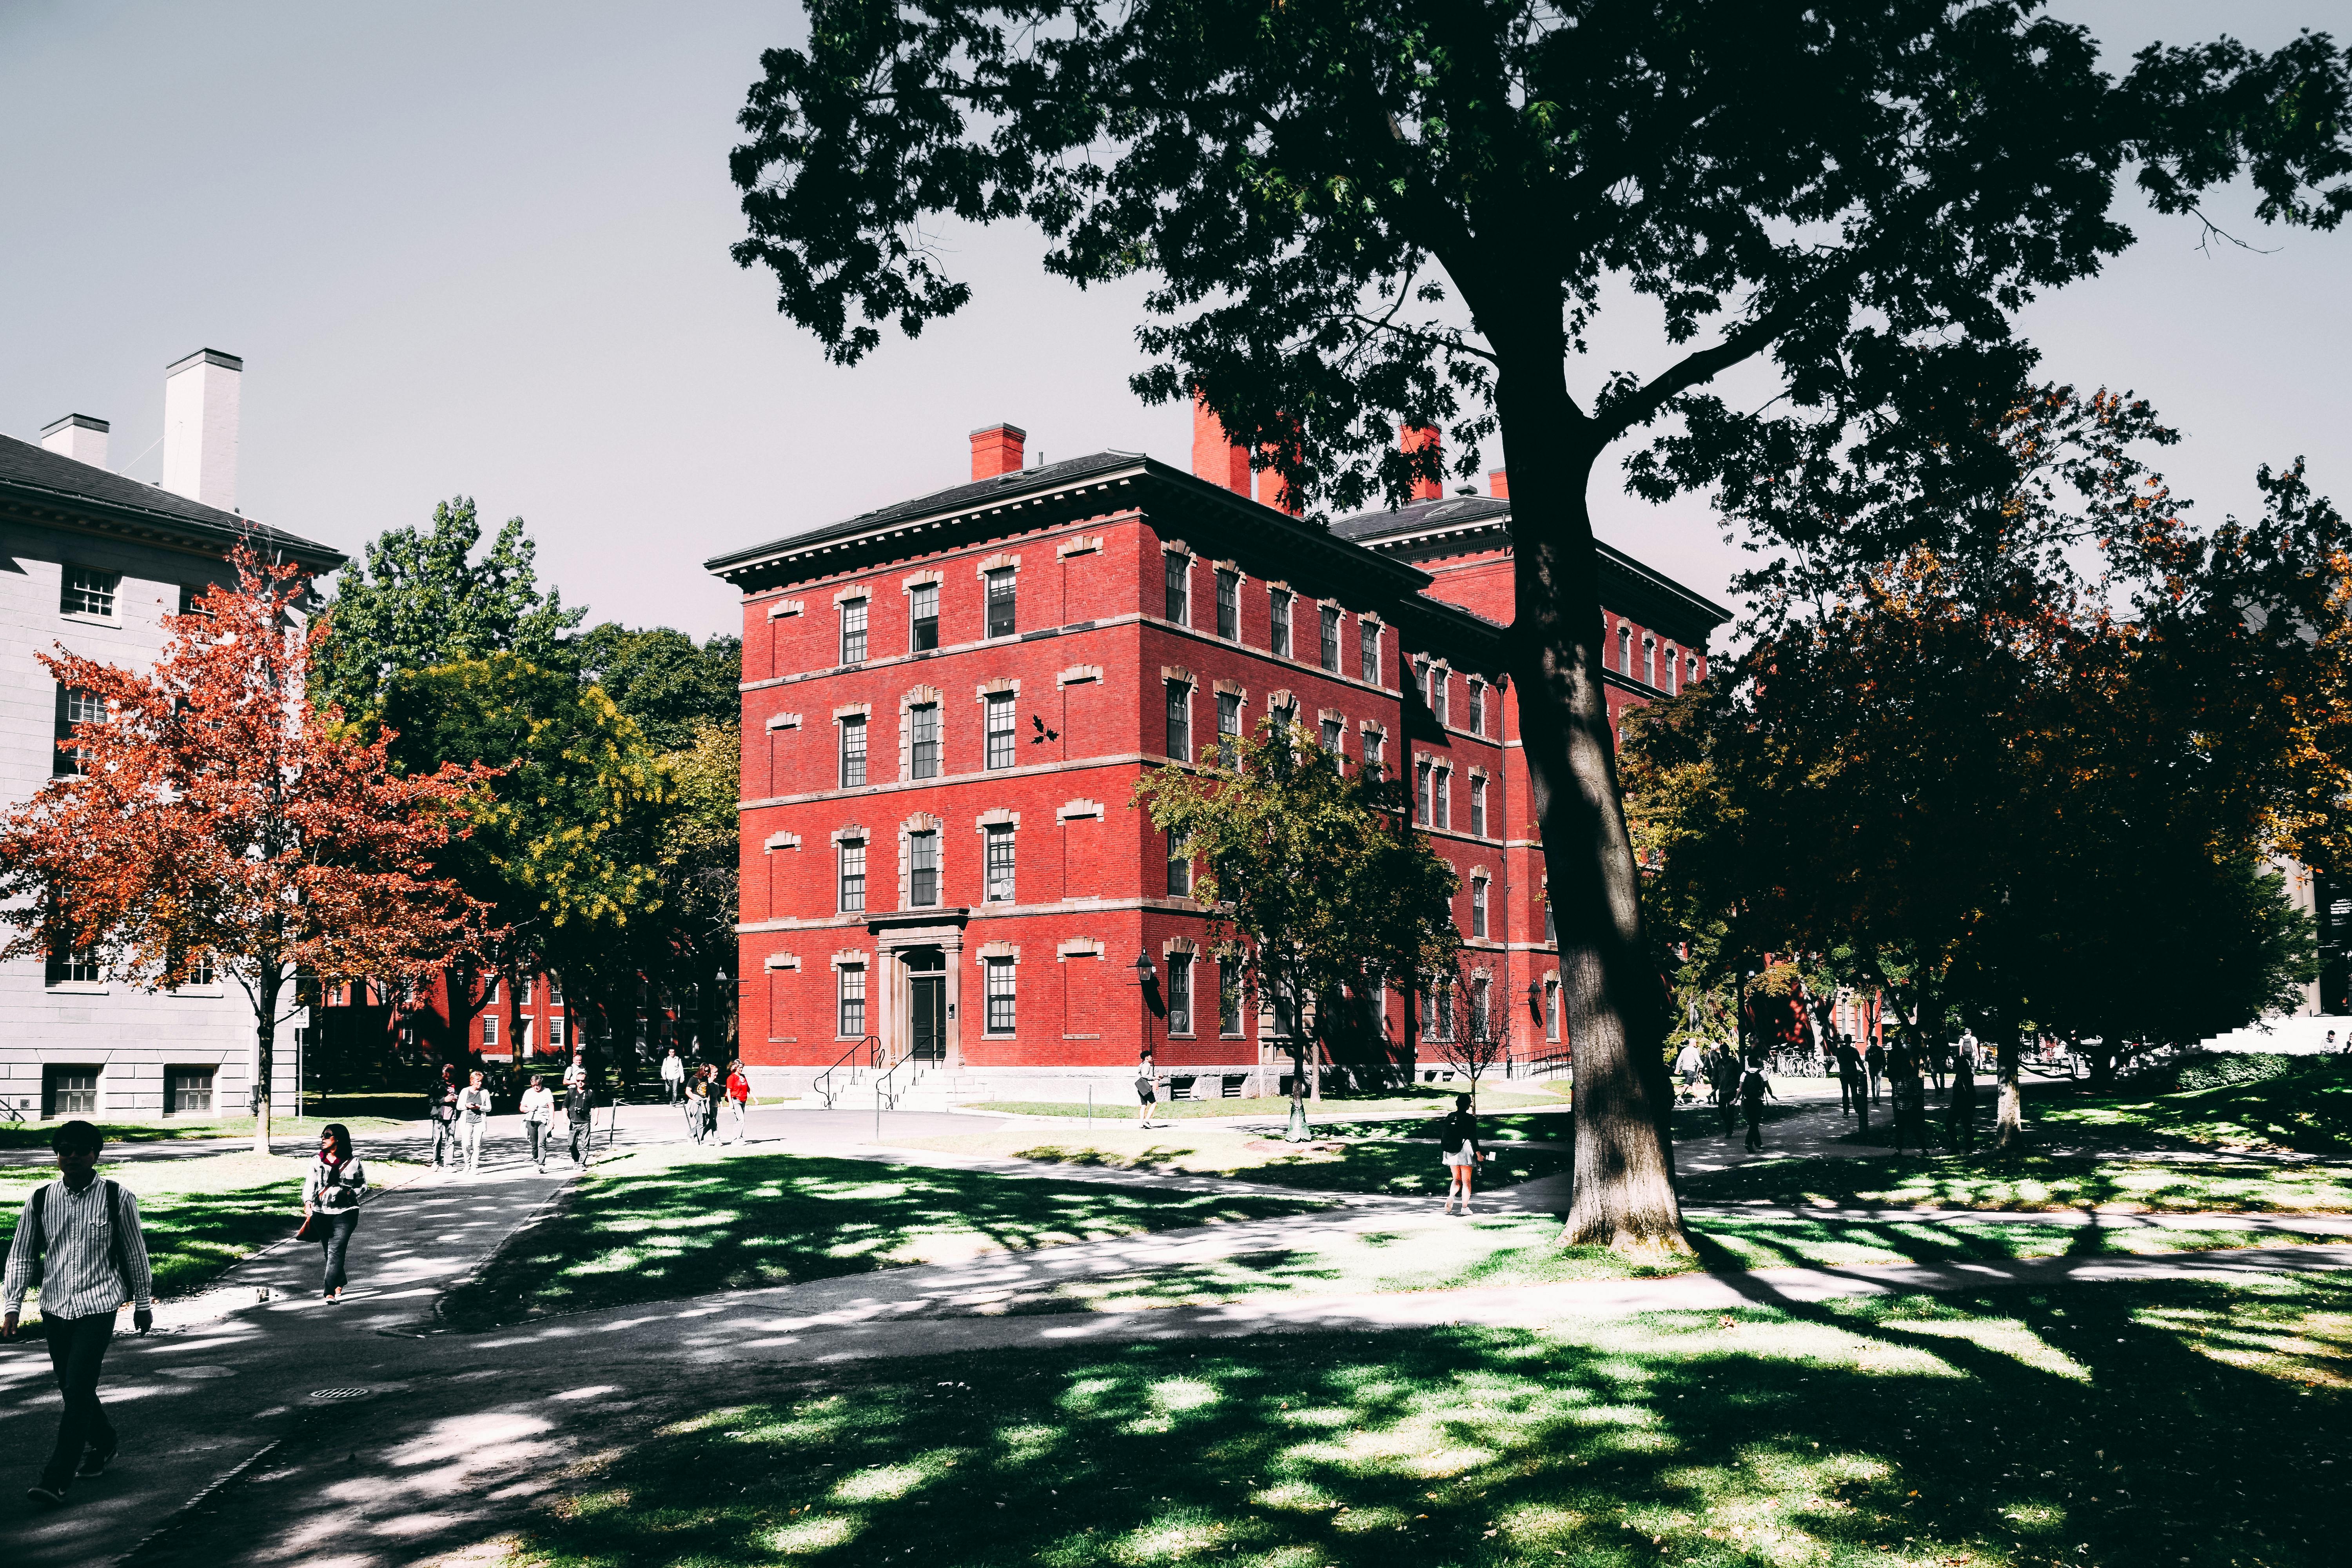 A school campus. For illustration purposes only | Source: Pexels